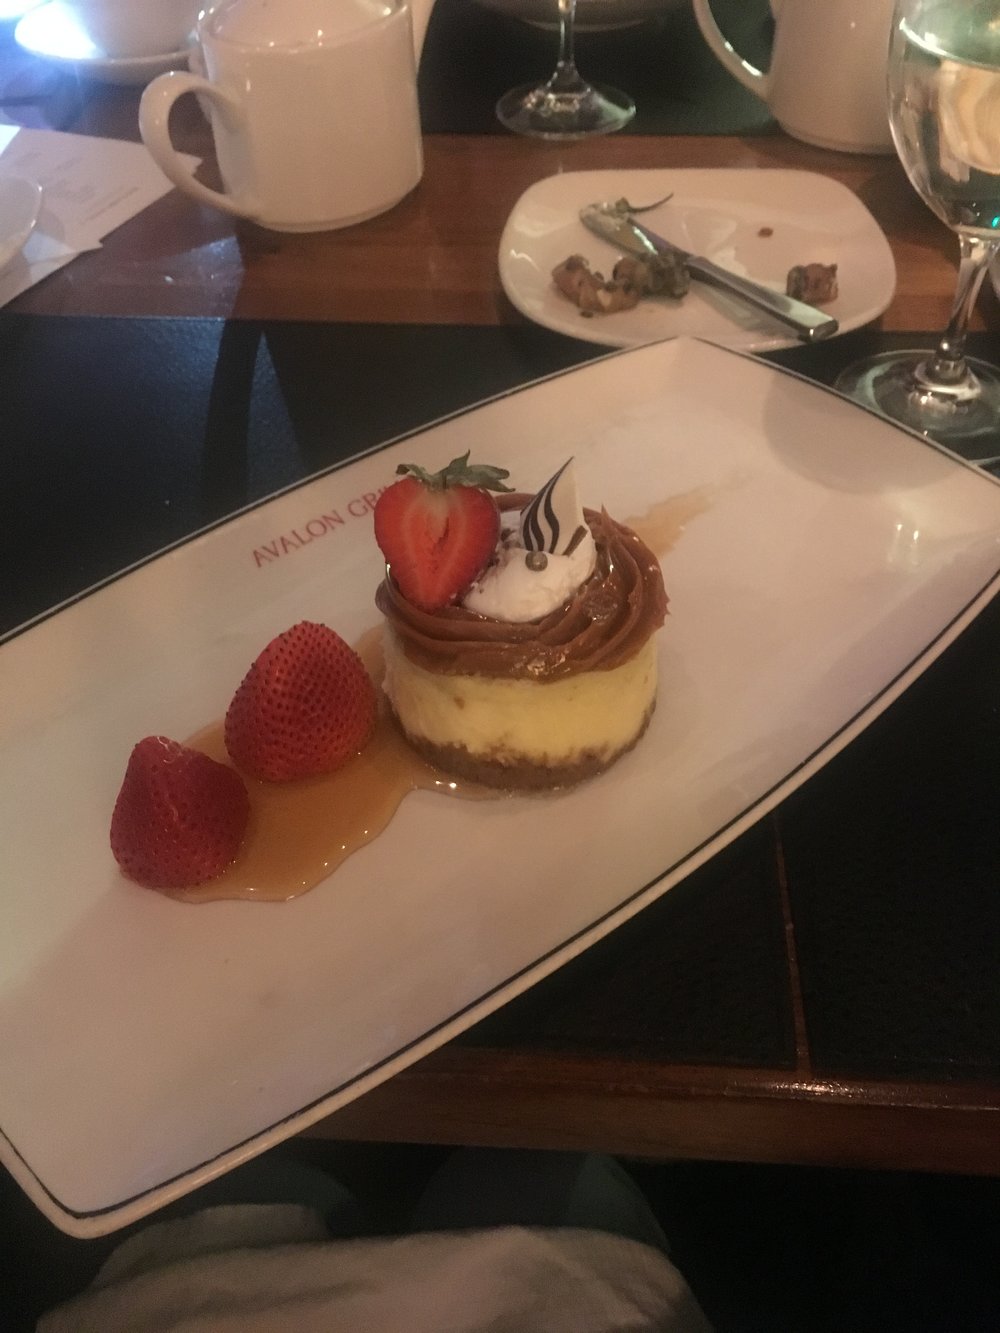 Dulce de Leche cheesecake from Avalon Grille